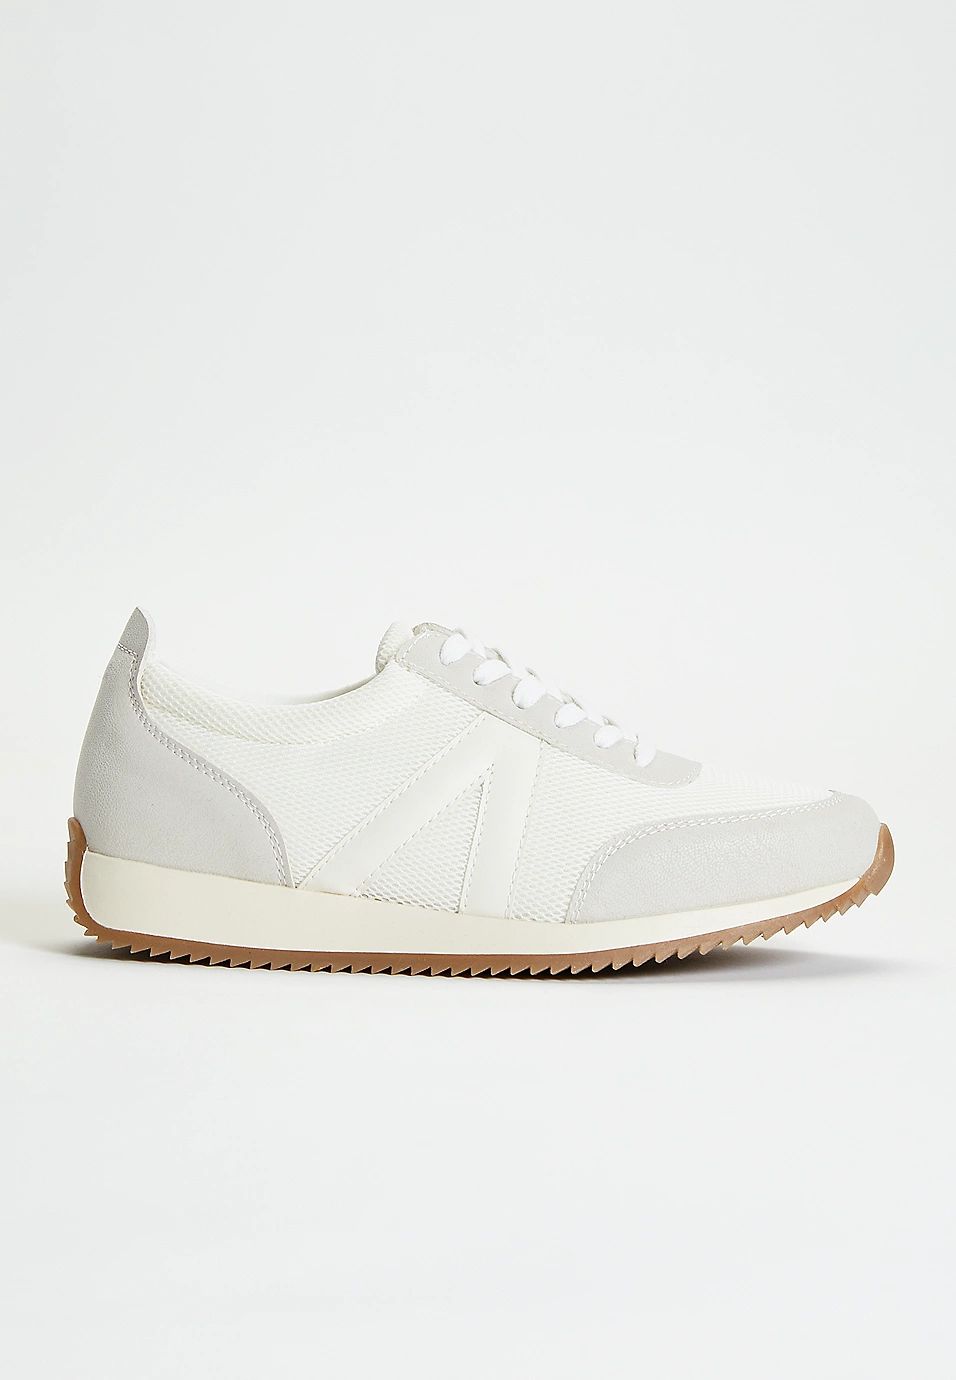 MIA™ Dilya Gray Colorblock Sneaker | Maurices